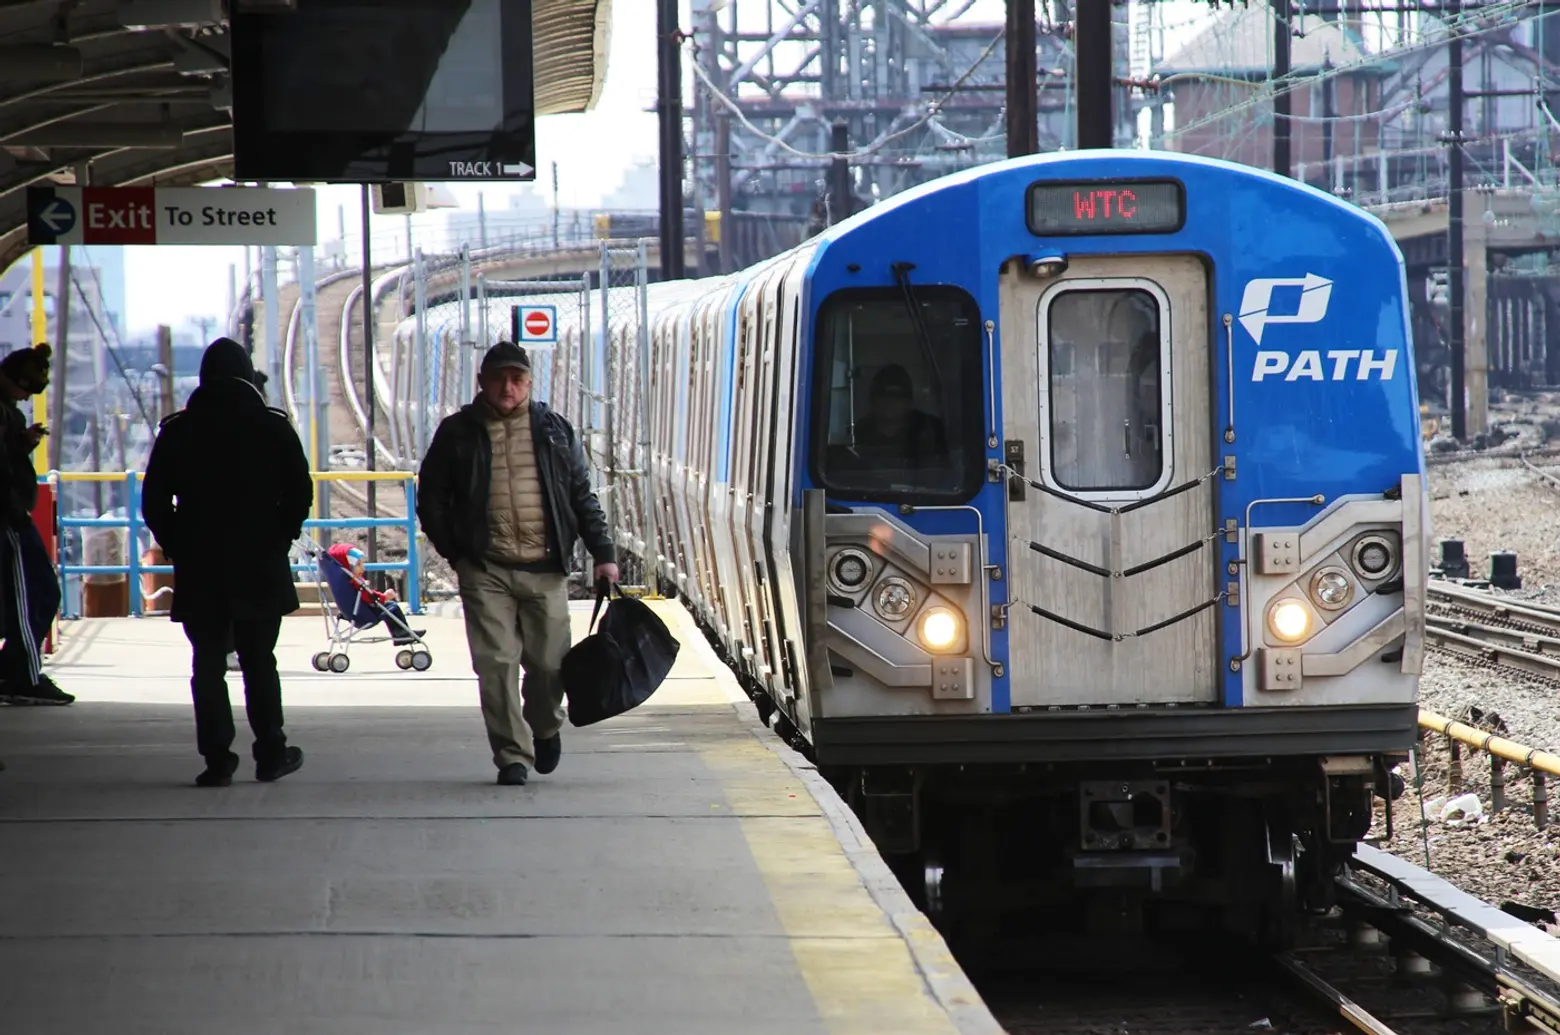 Proposal to extend PATH train to Newark airport heads to public meetings this week